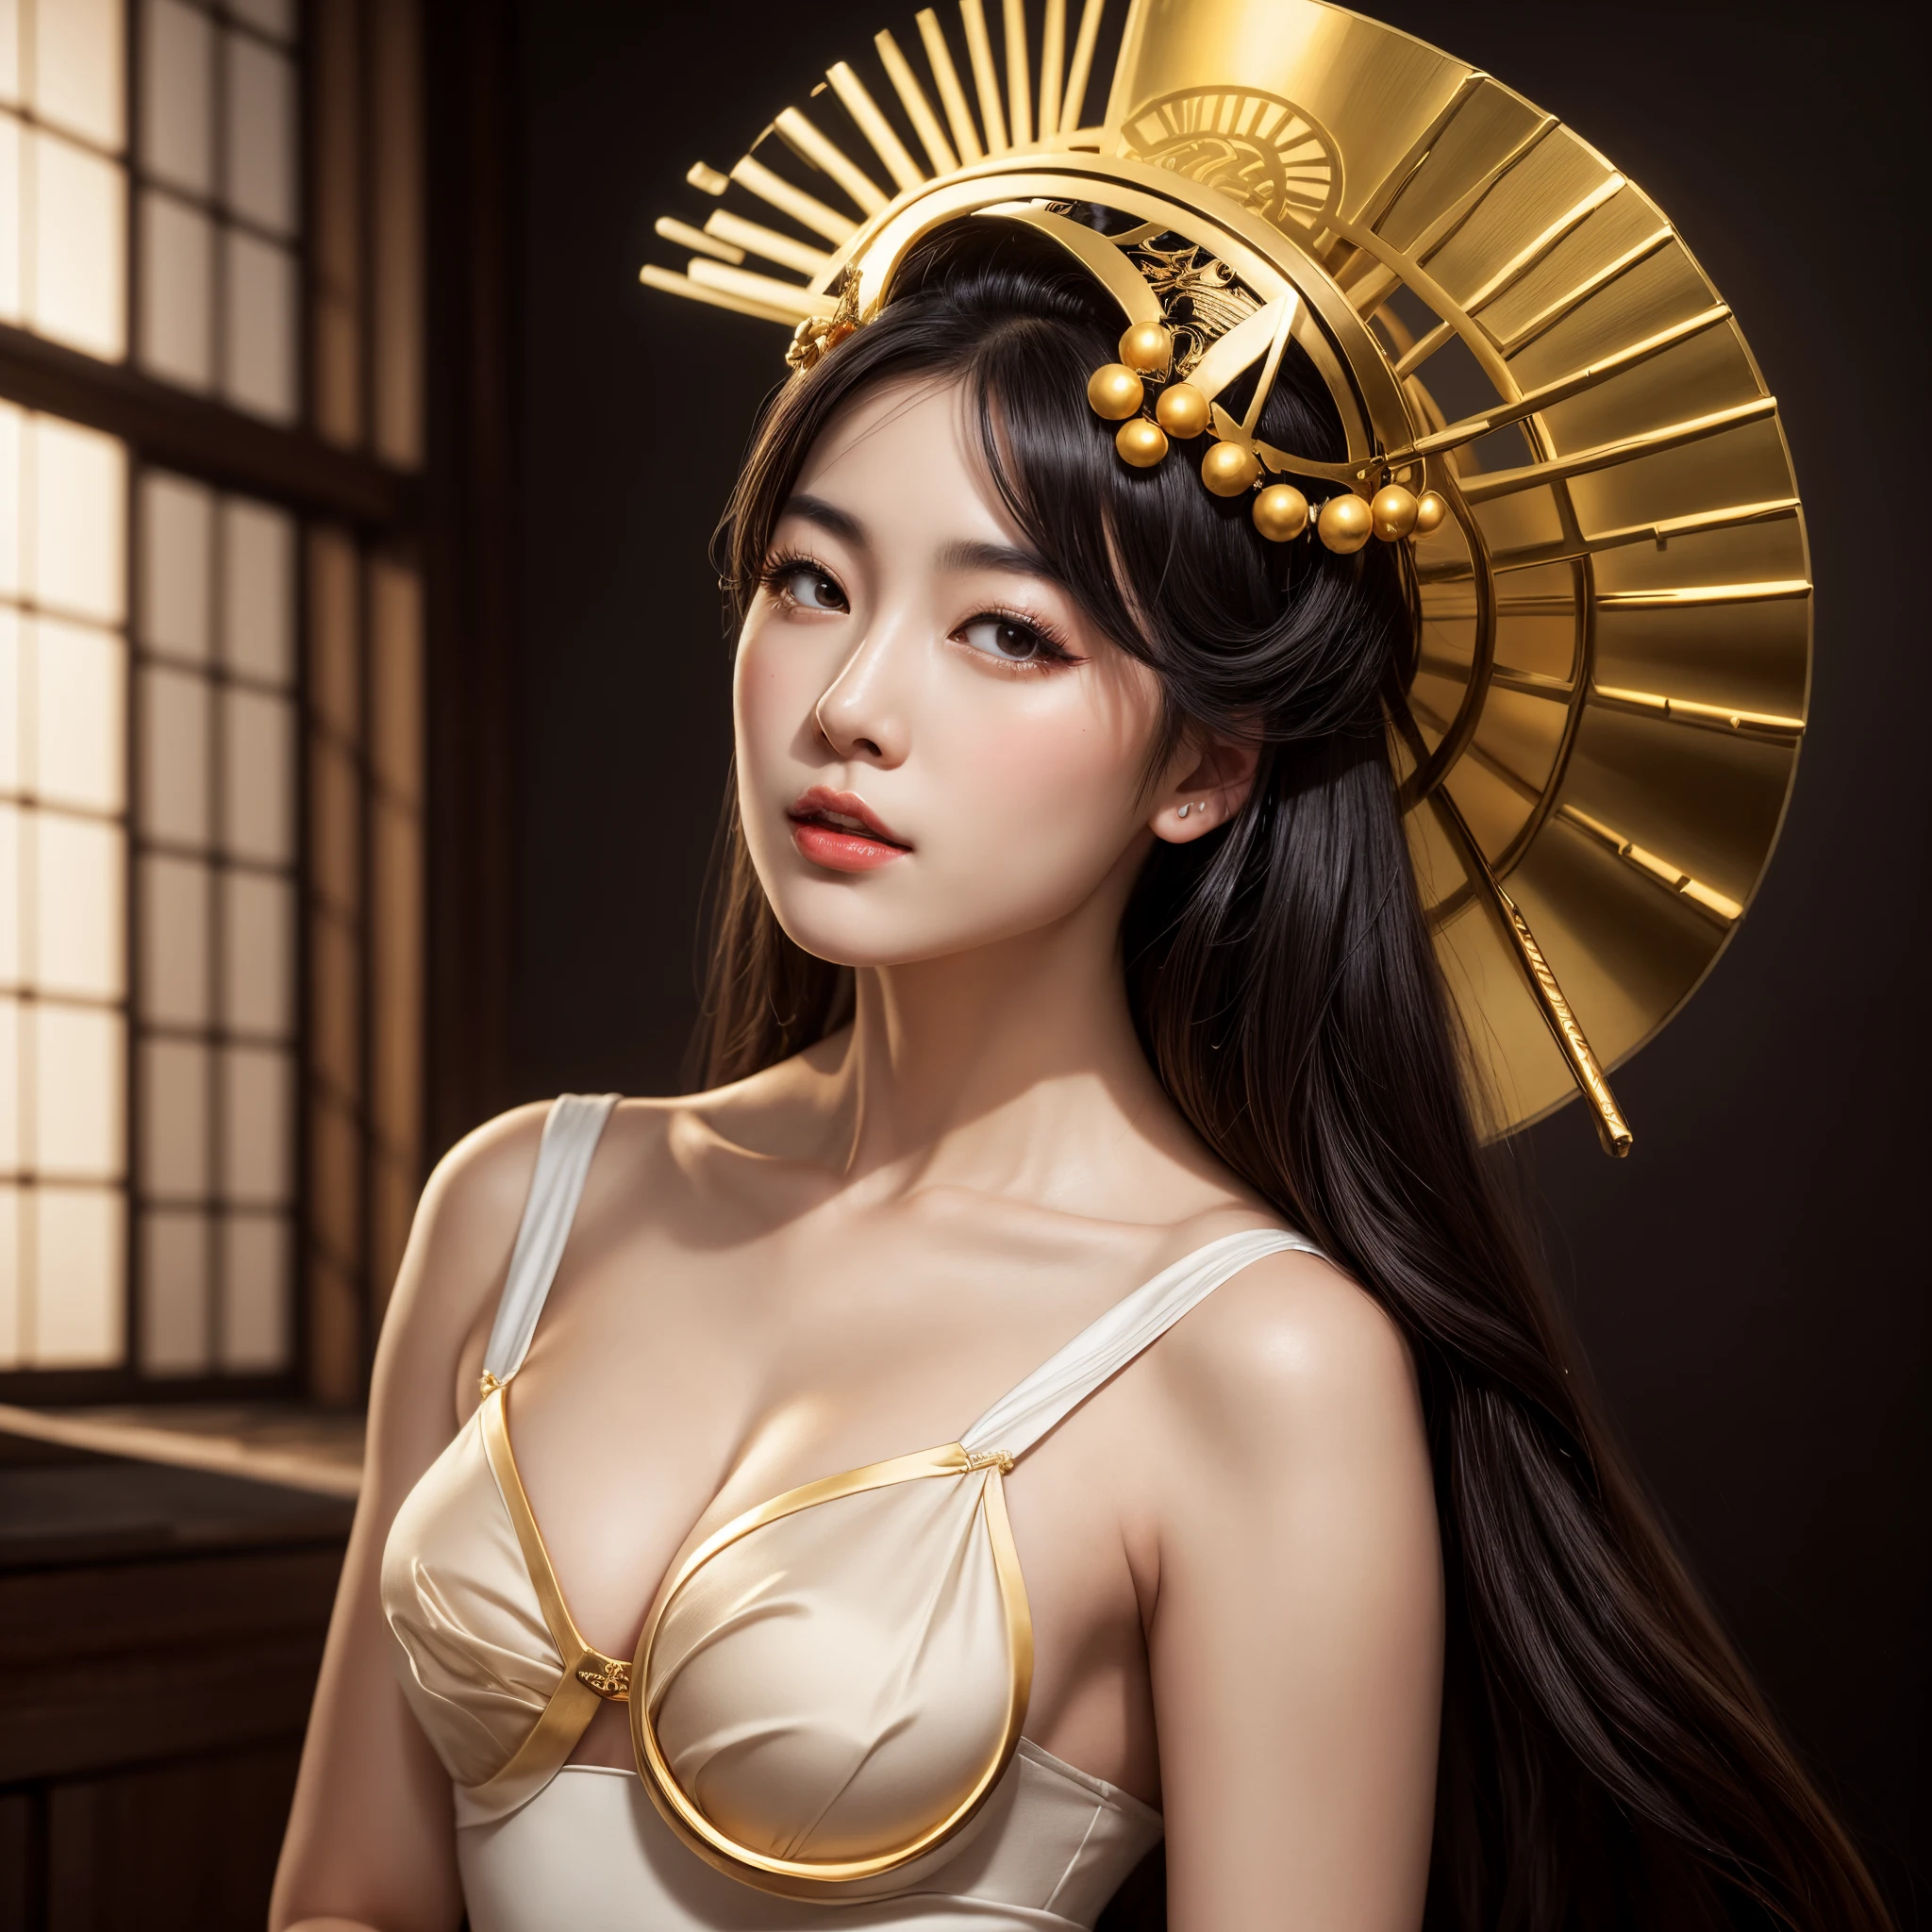 a beautiful young geisha, hot, horny, sexy, with flowing black hair, full lips, full breasts, silky skin, beautiful eyes, wearing a white top, wearing a beautiful golden stylized crown, Japanese Goddess, glamorous and sexy geisha, Hyperrealistic Asian woman, photorealistic Empress goddess, sensual goddess of intricate details.